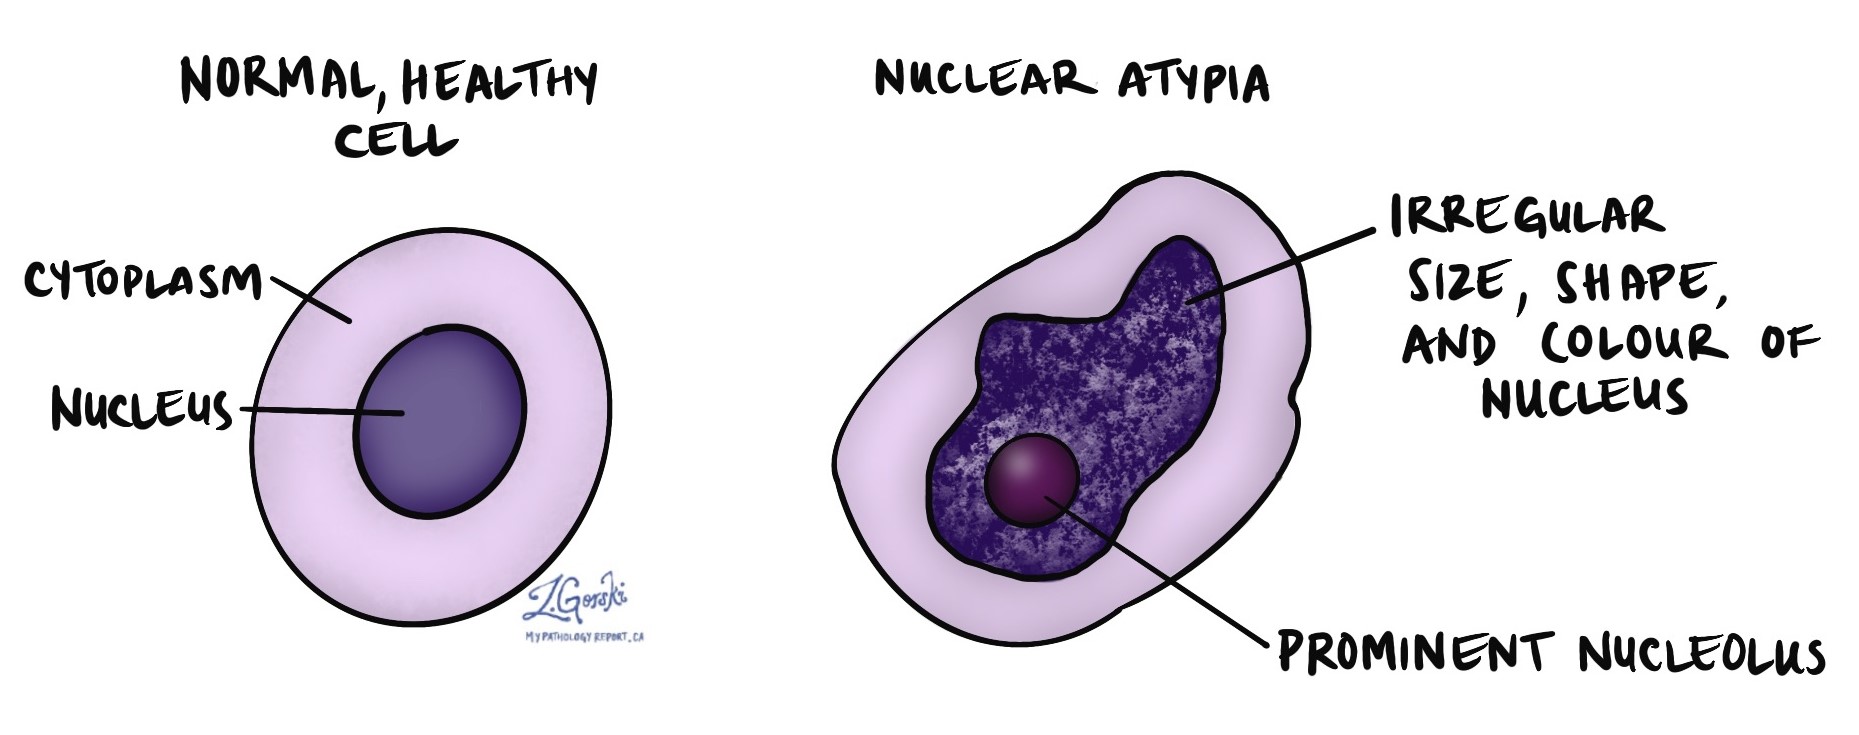 nuclear atypia